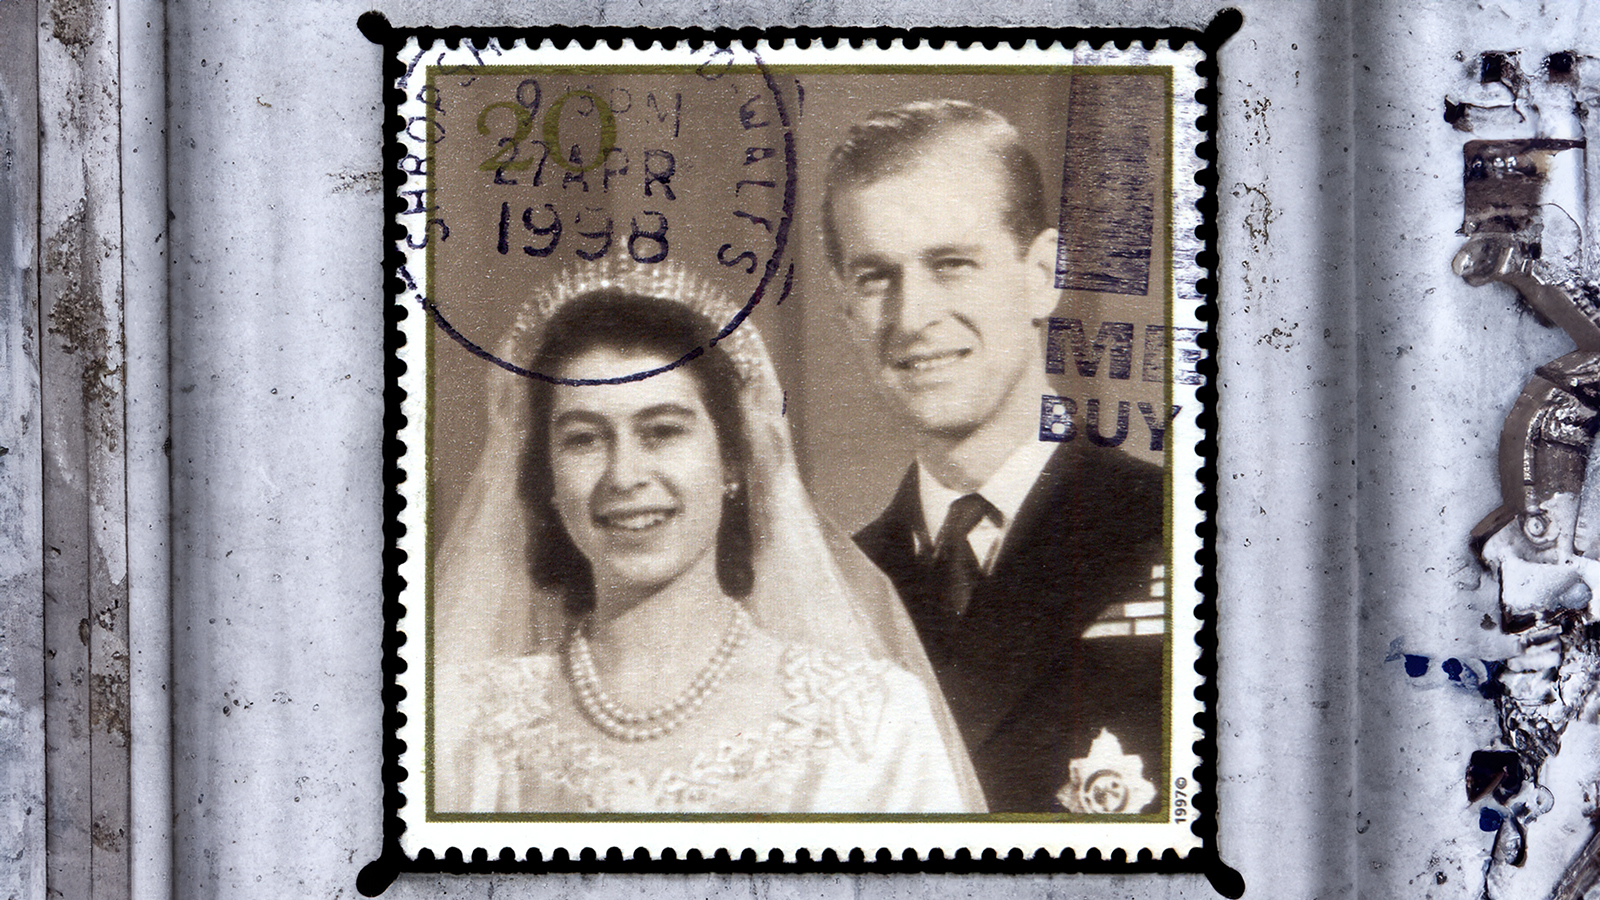 MOSCOW, December 1, 2018: British Postage Stamp celebrating the Golden Anniversary of the 1947 Royal Wedding of Queen Elizabeth 2nd, showing wedding picture, circa 1997